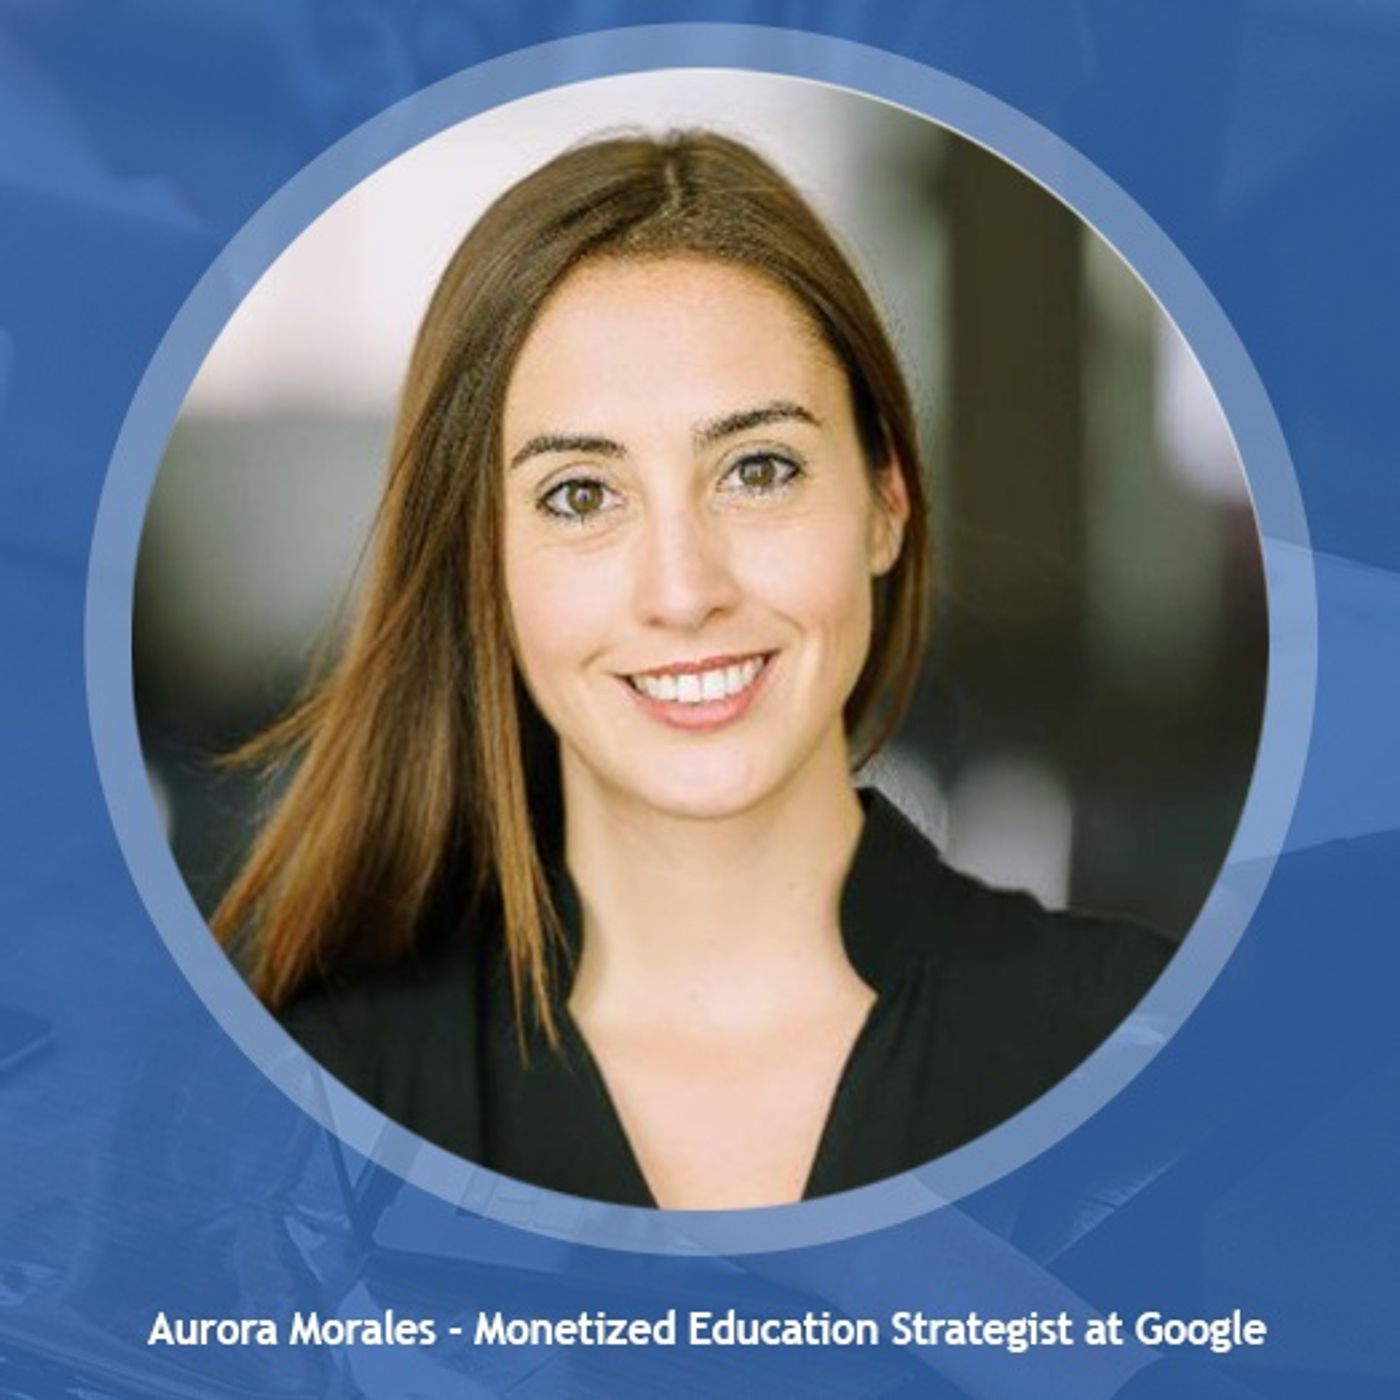 AdSense and AdMob Monetization in 2020 with Aurora Morales